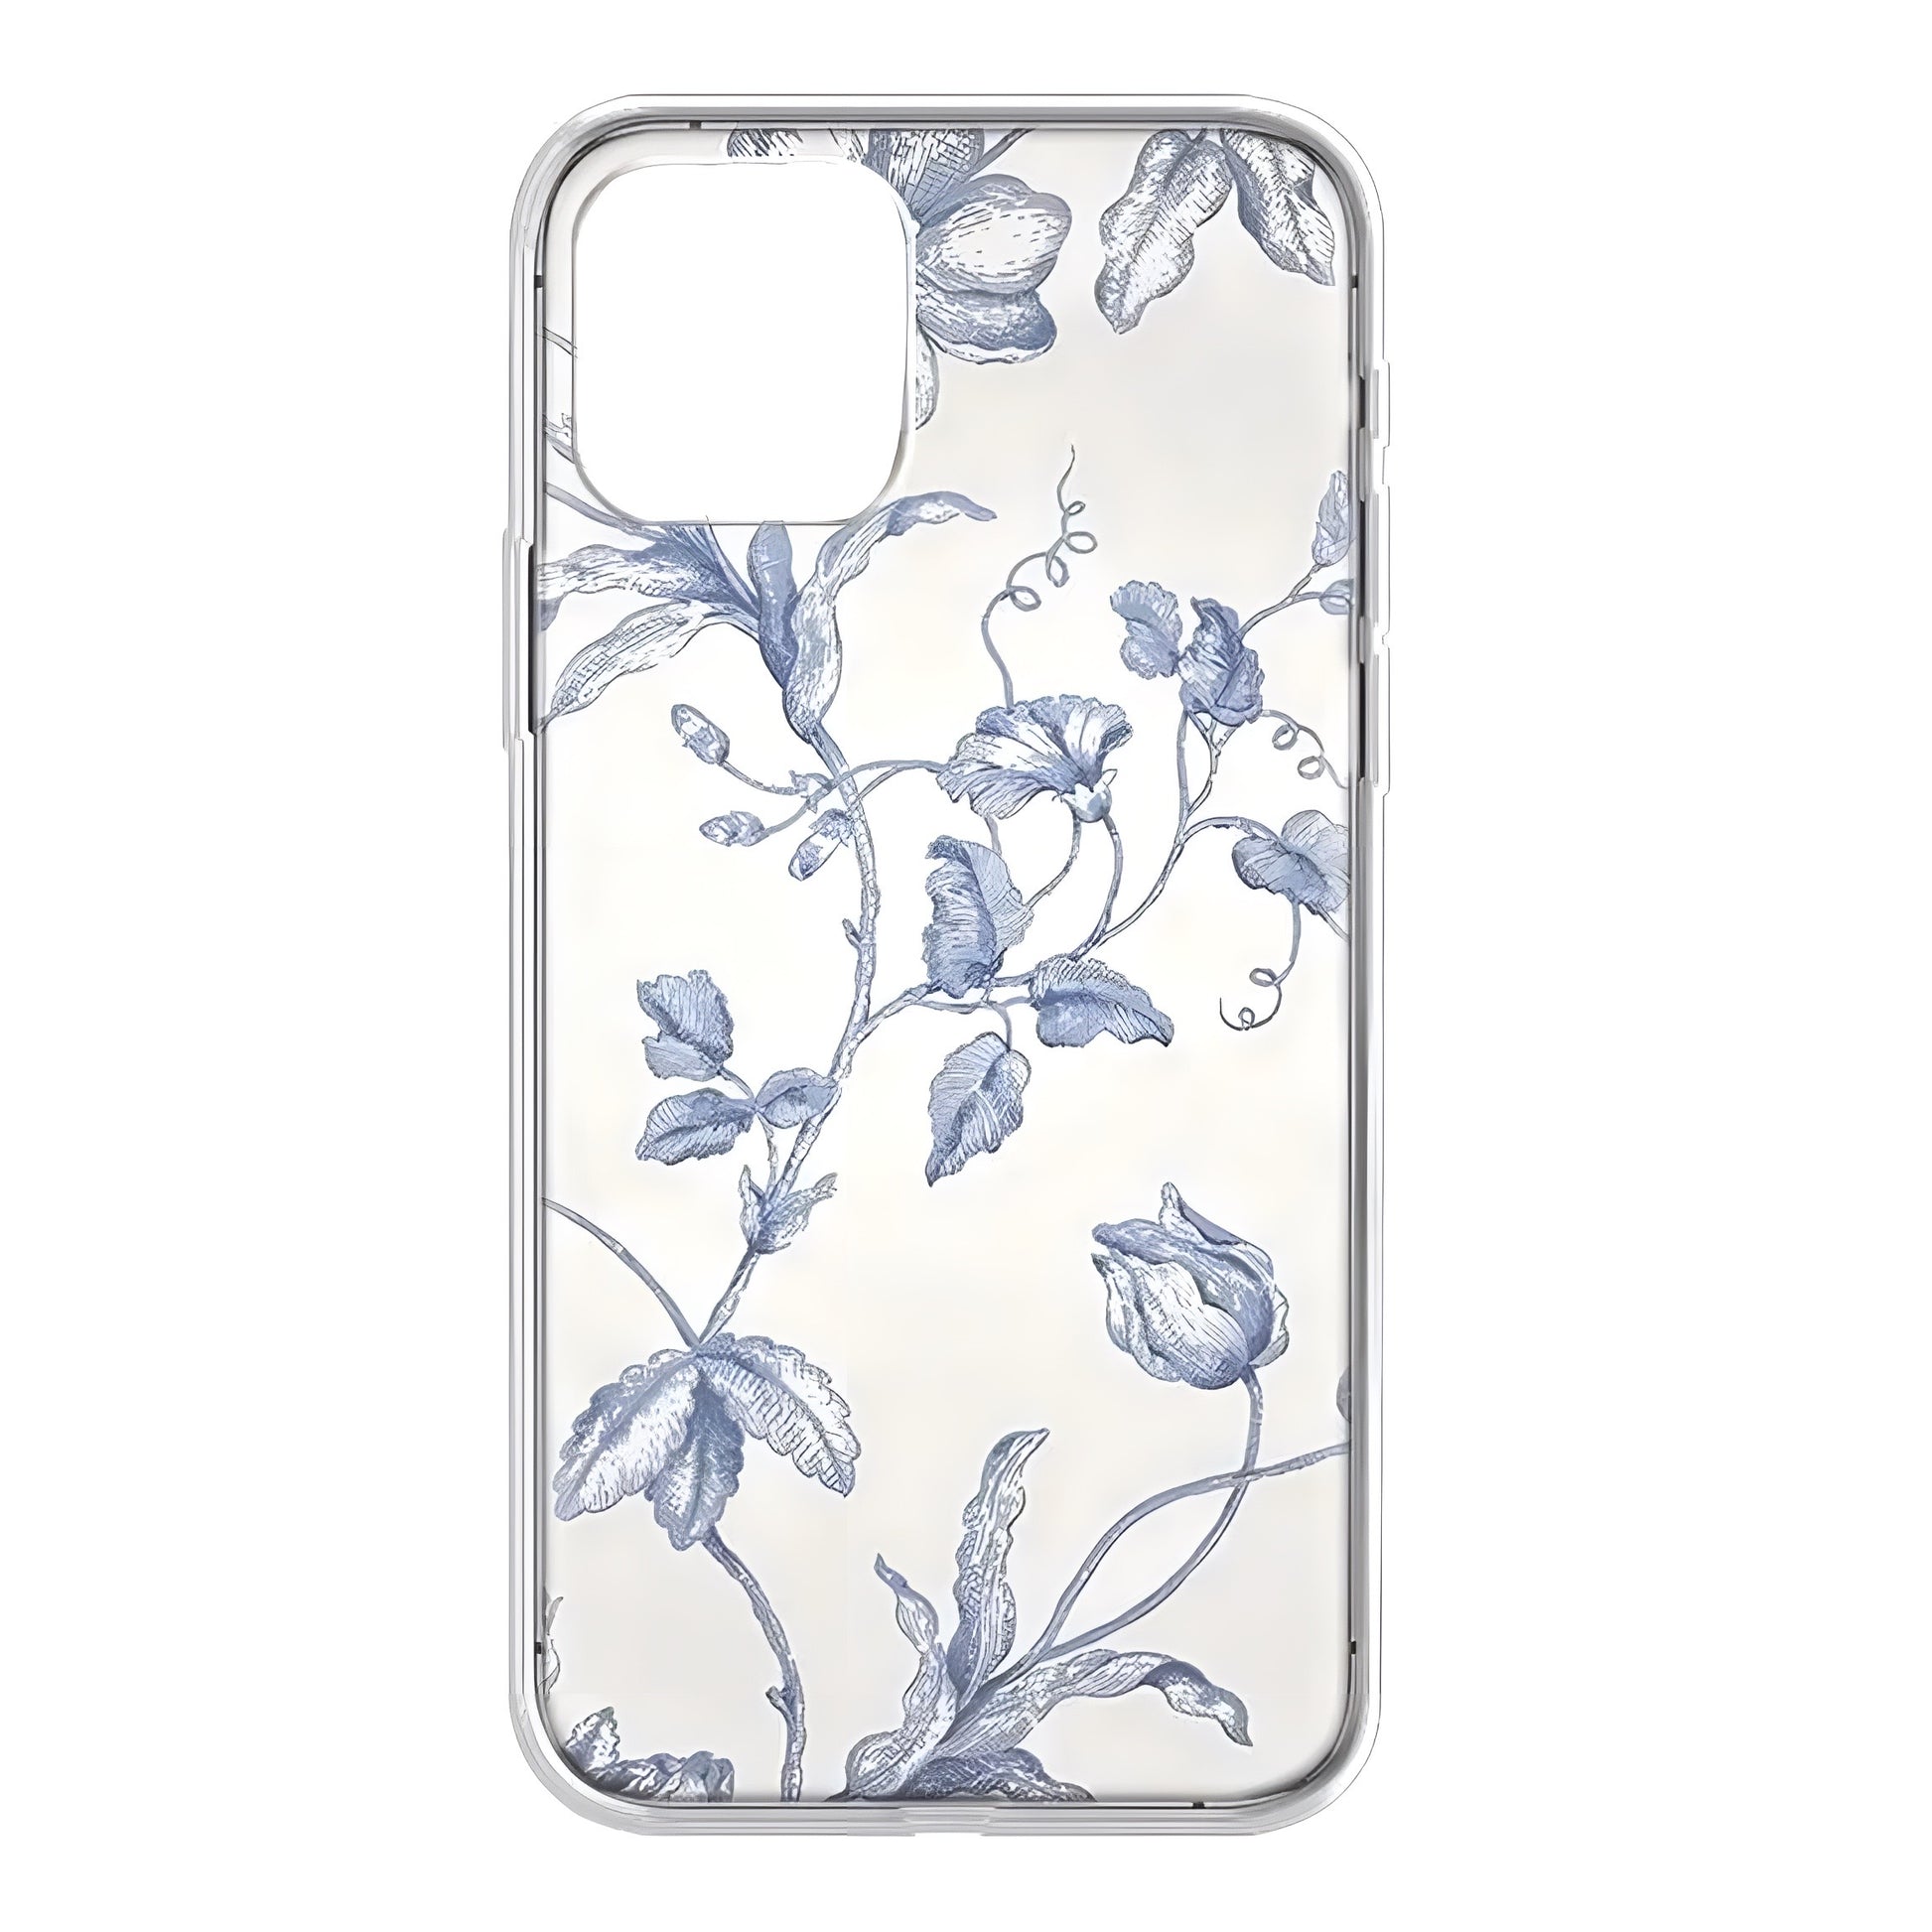 floral-print-light-blue-and-white-multi-color-flower-patterned-design-hard-plastic-high-quality-shock-proof-phone-case-for-iphone-chic-trendy-women-ladies-girls-spring-2024-summer-feminine-elegant-preppy-coastal-granddaughter-beach-greece-european-vacation-style-wildflower-casetify-dupe